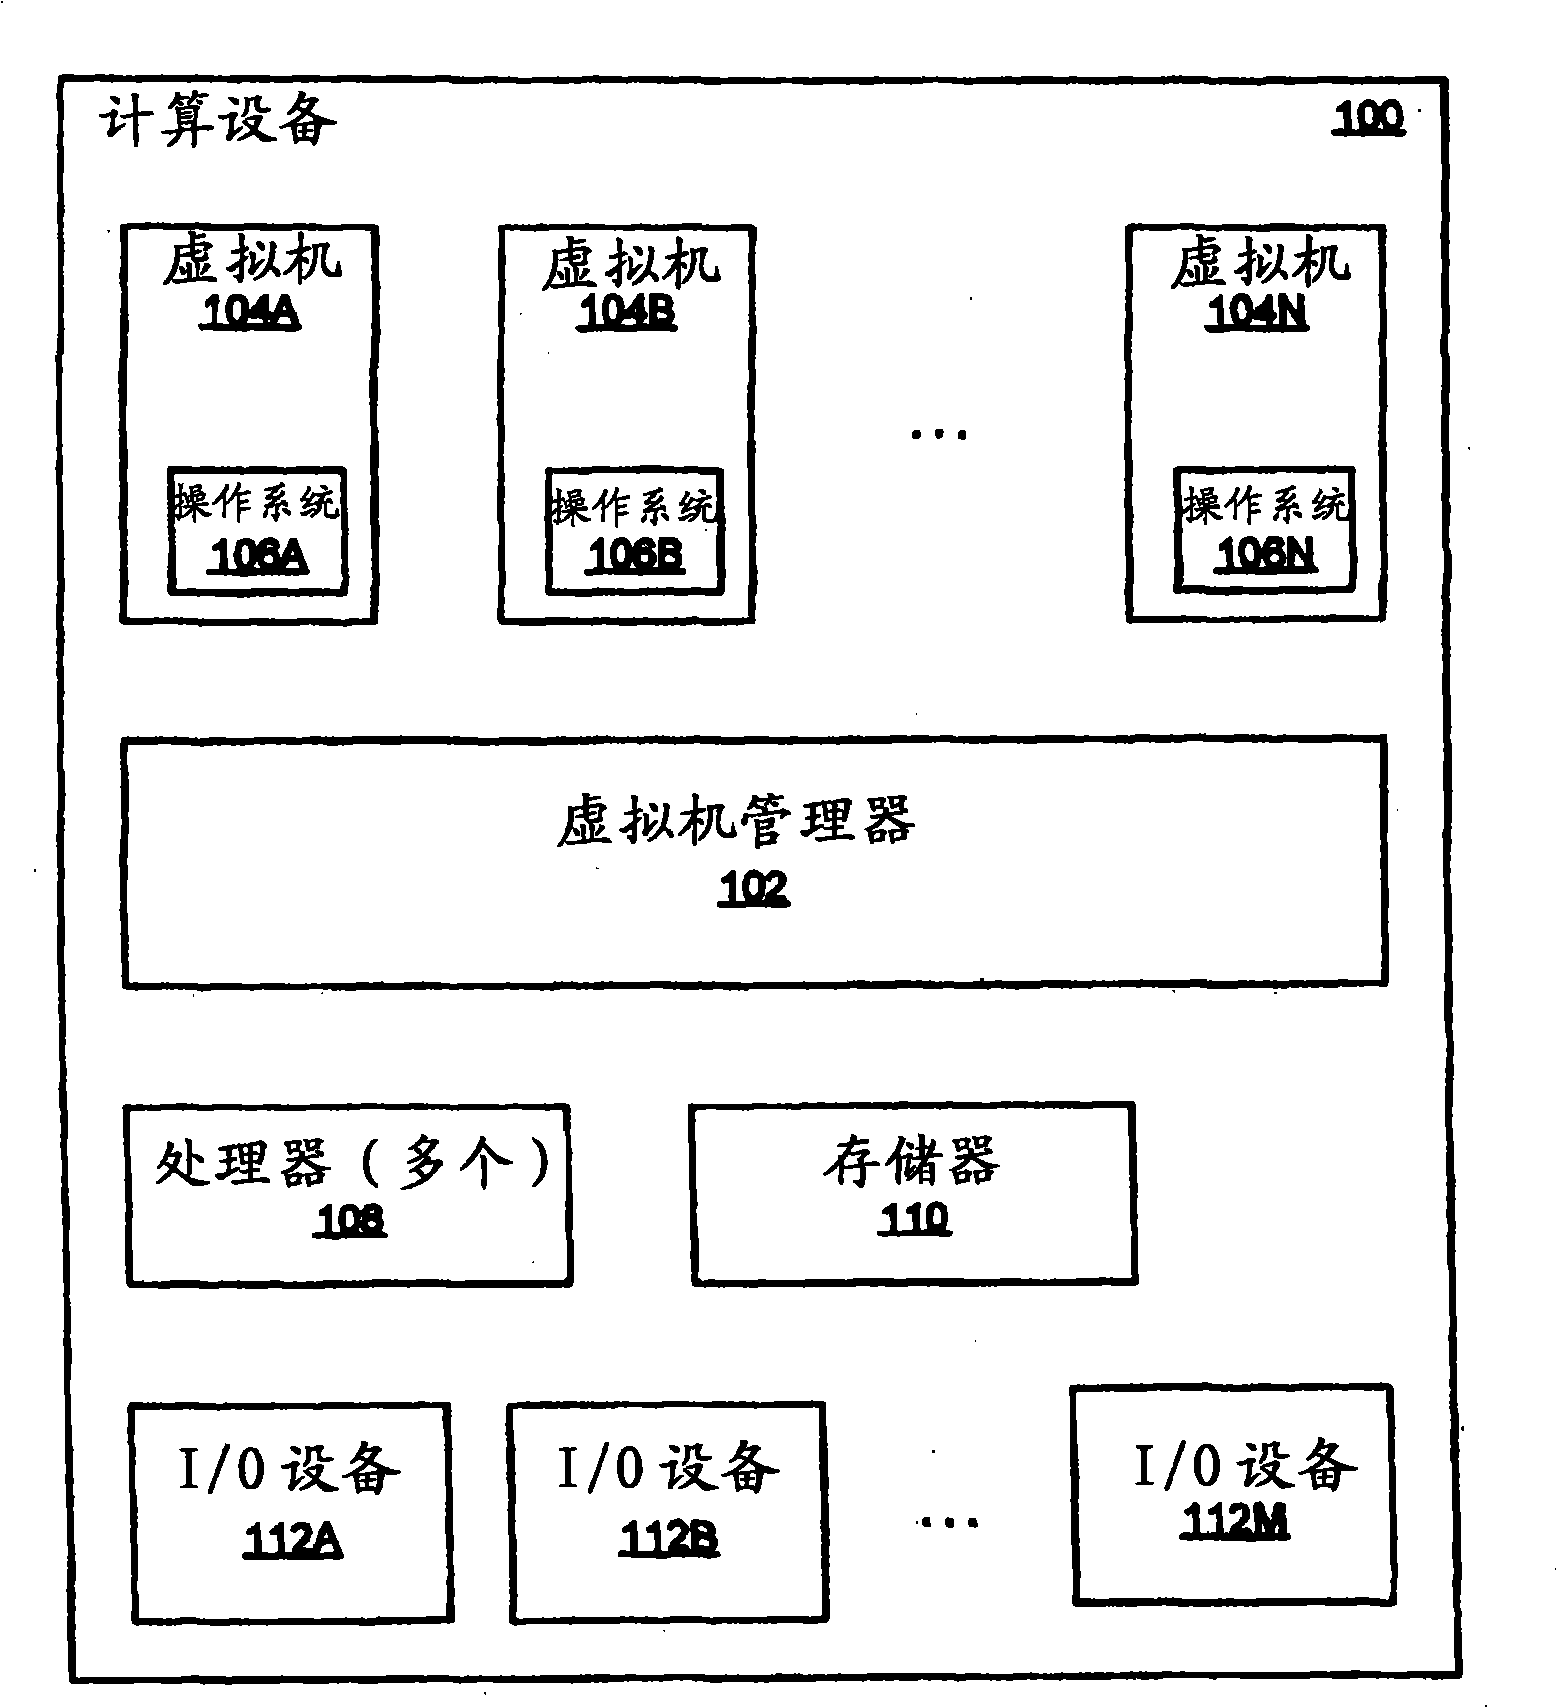 Direct-memory access between input/output device and physical memory within virtual machine environment